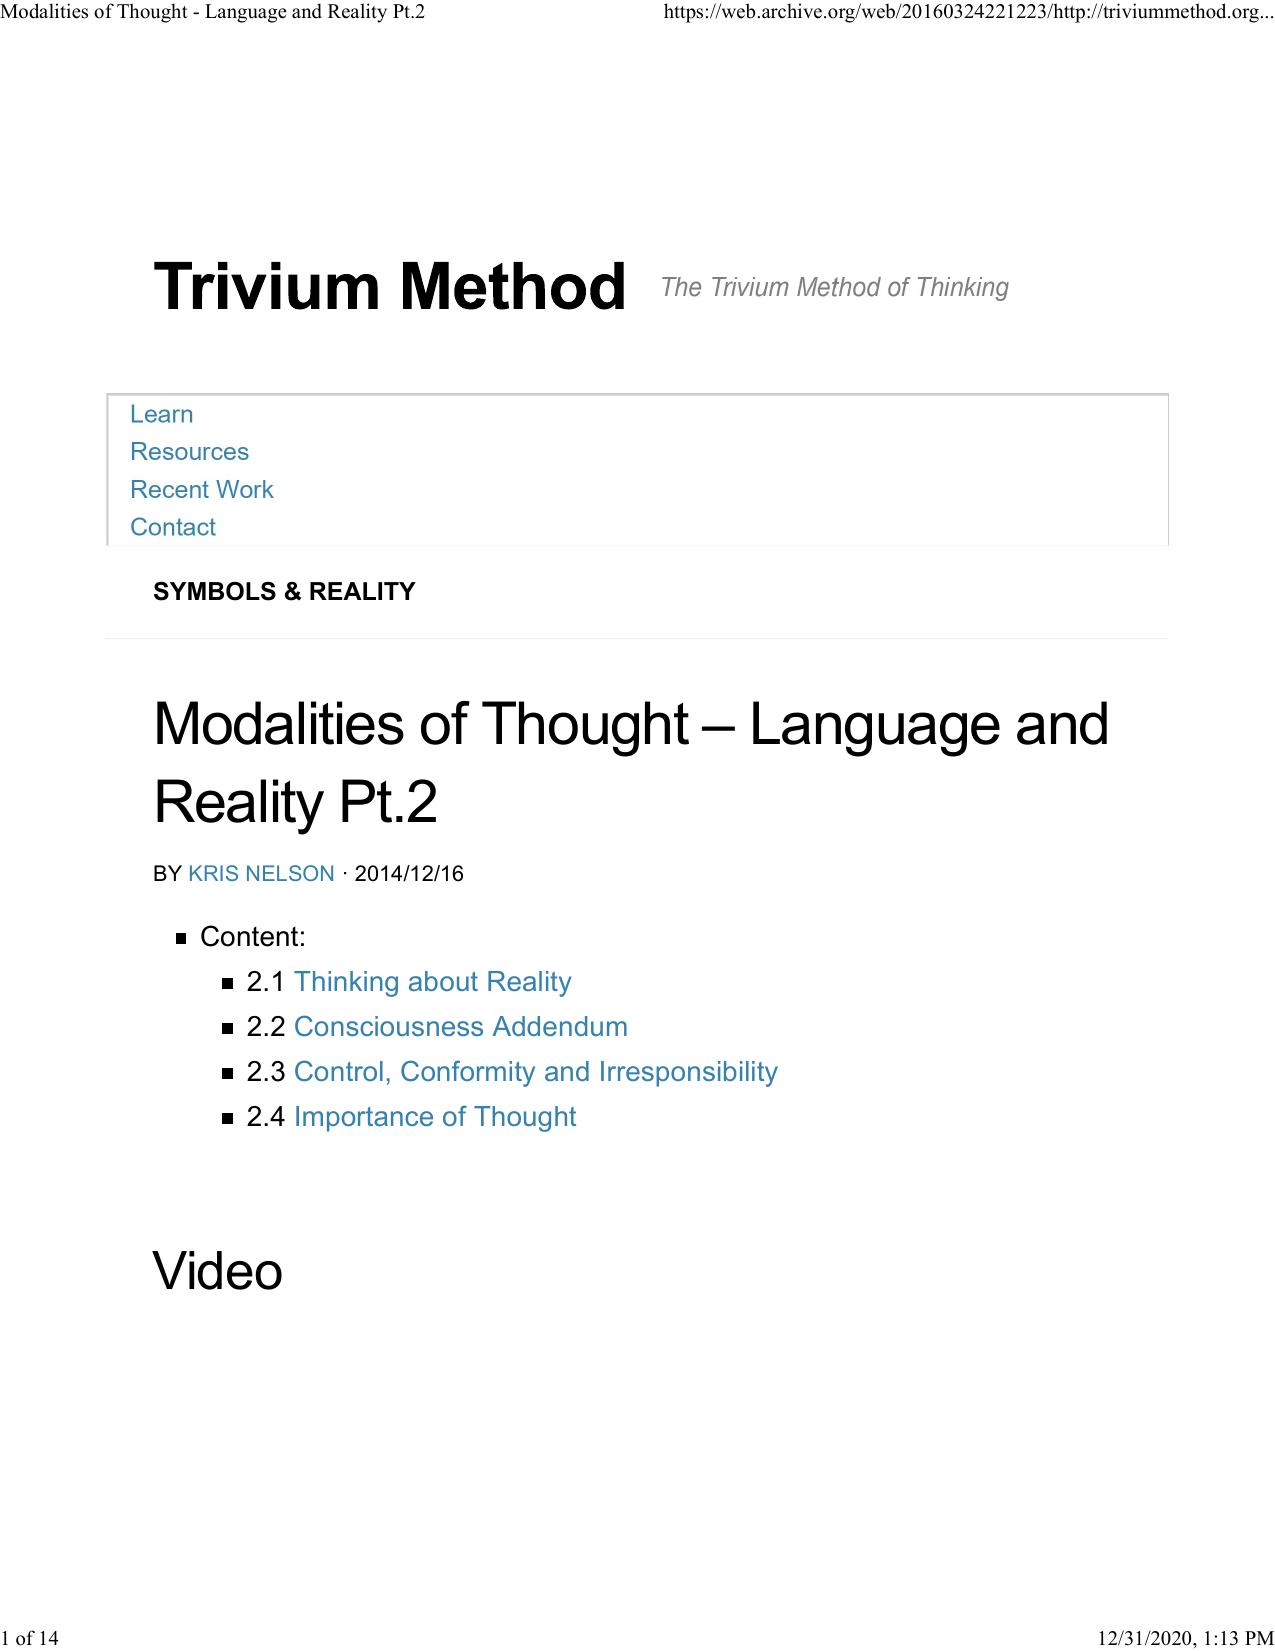 Modalities of Thought - Language and Reality Pt. 2